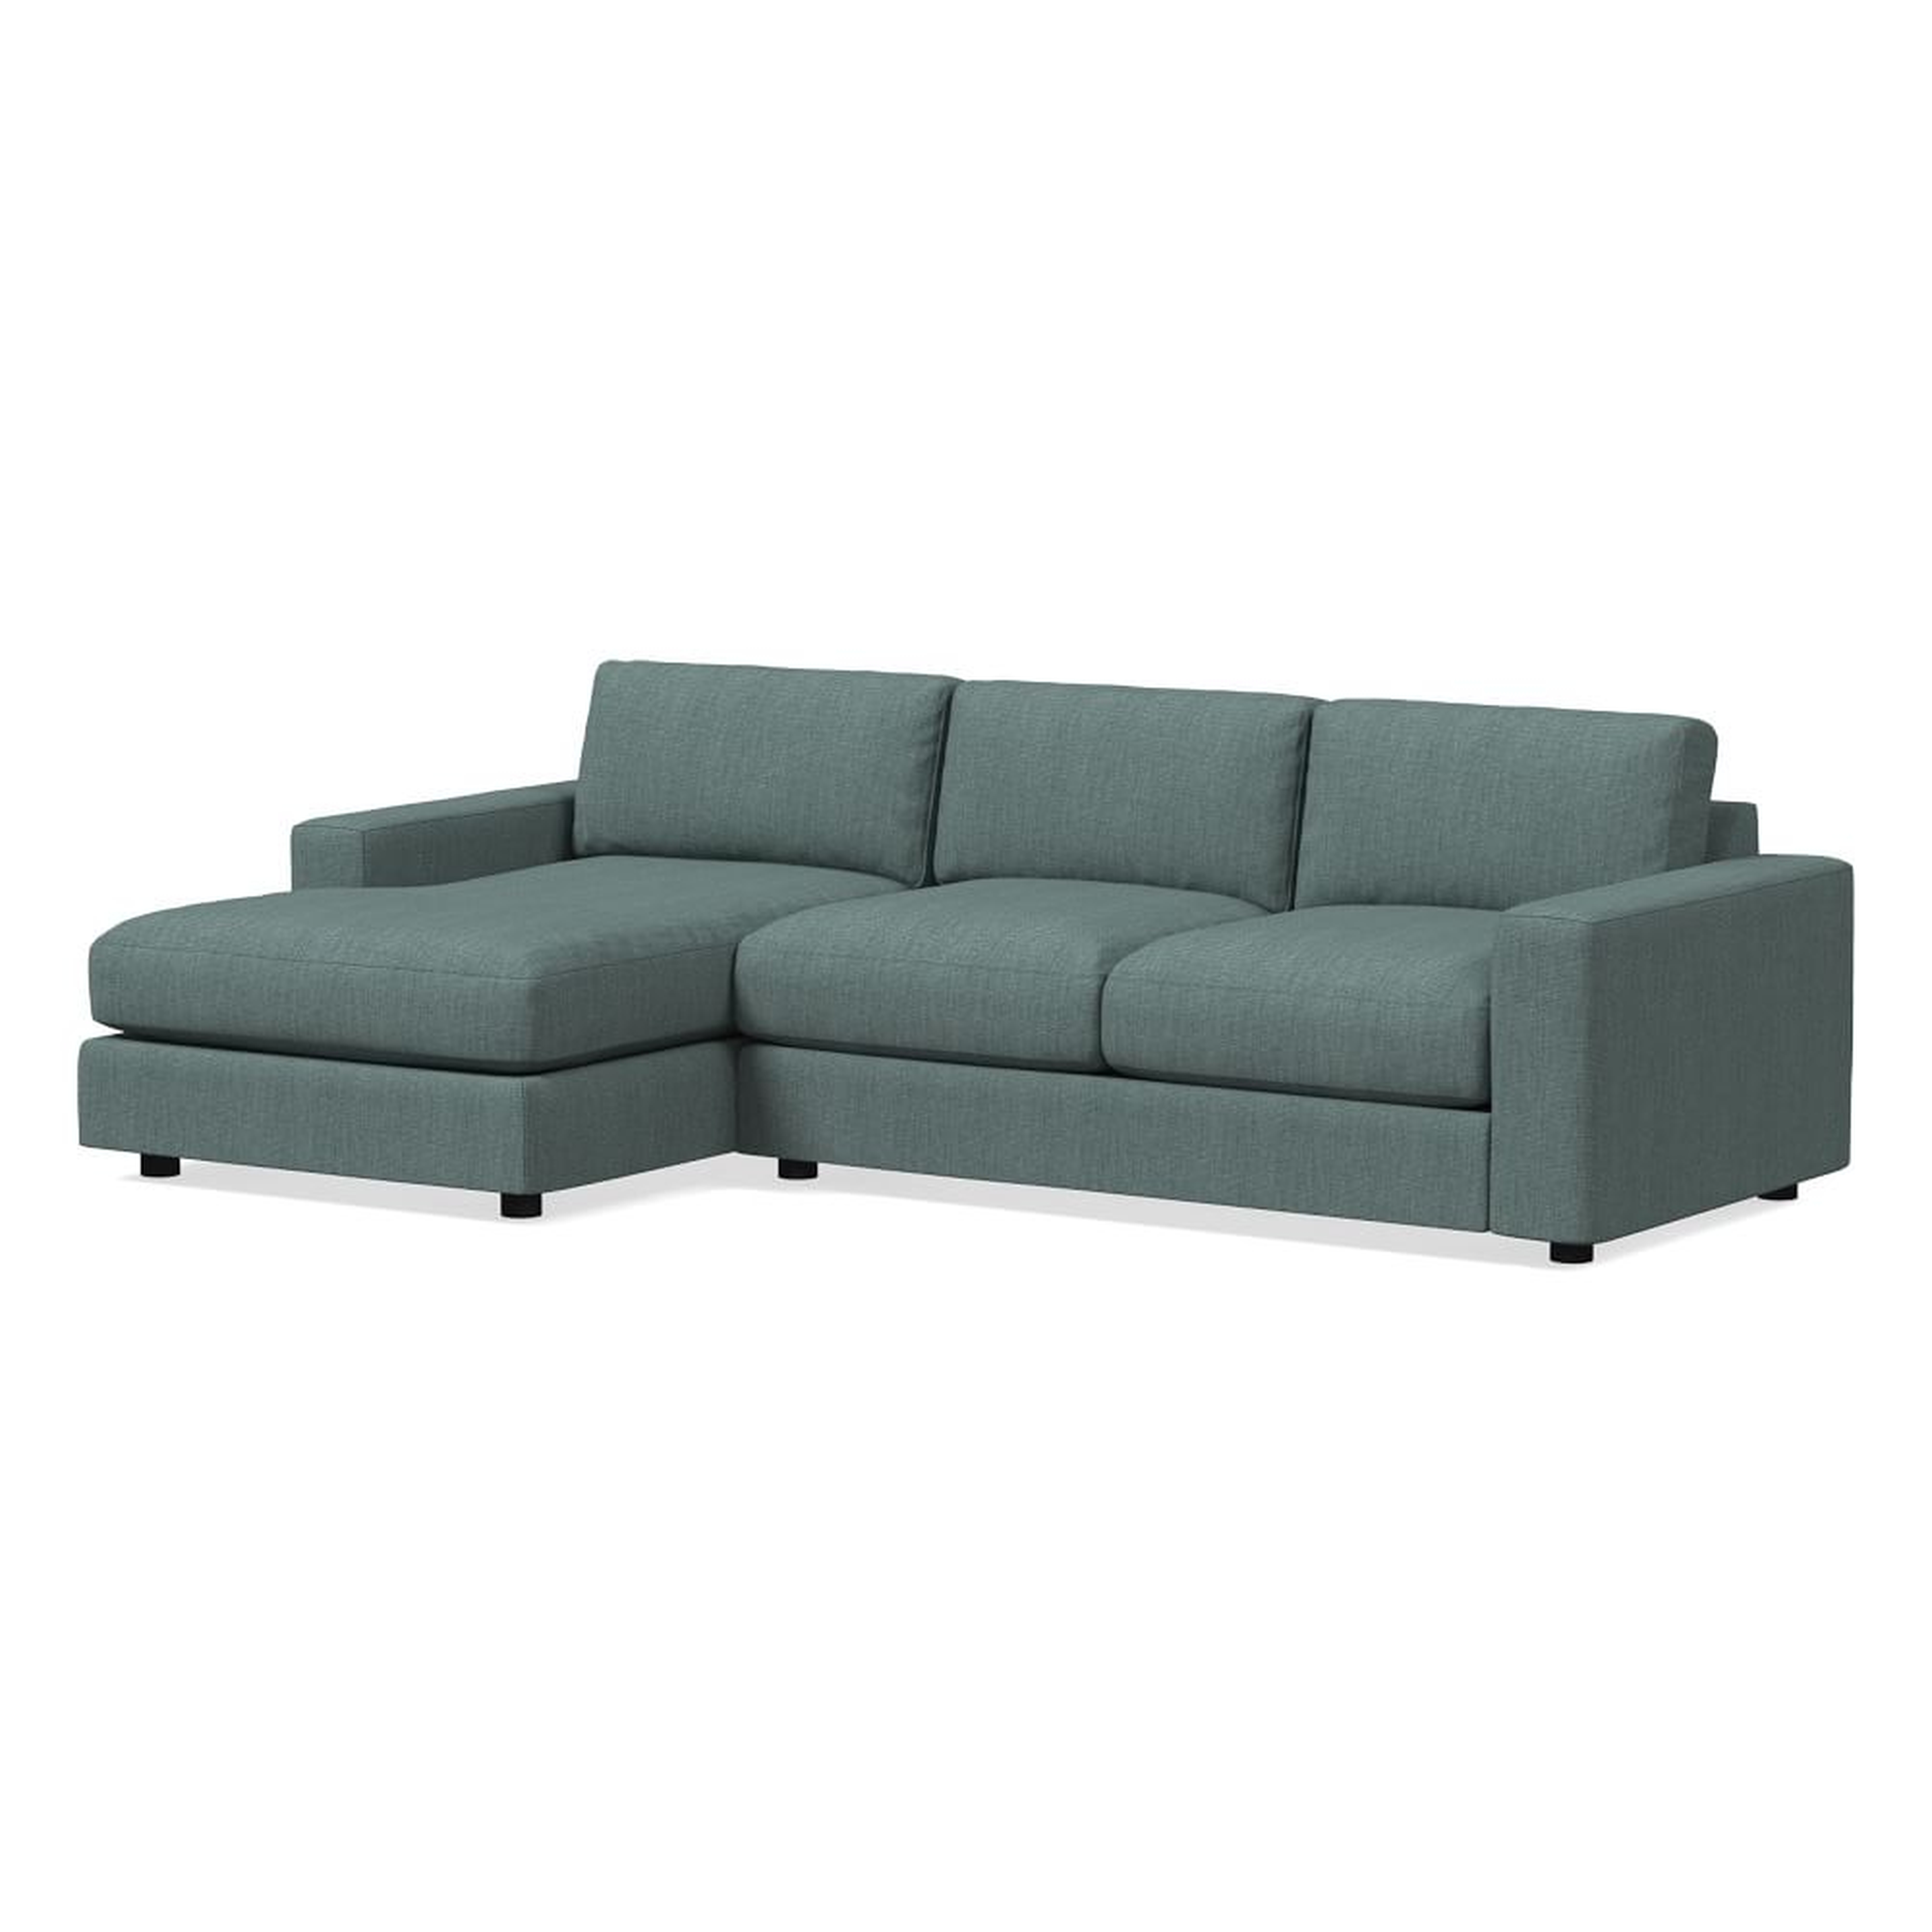 Urban Sectional Set 02: Right Arm 2 Seater Sofa, Left Arm Chaise, Poly, Performance Basket Slub, Ocean, Concealed Supports - West Elm